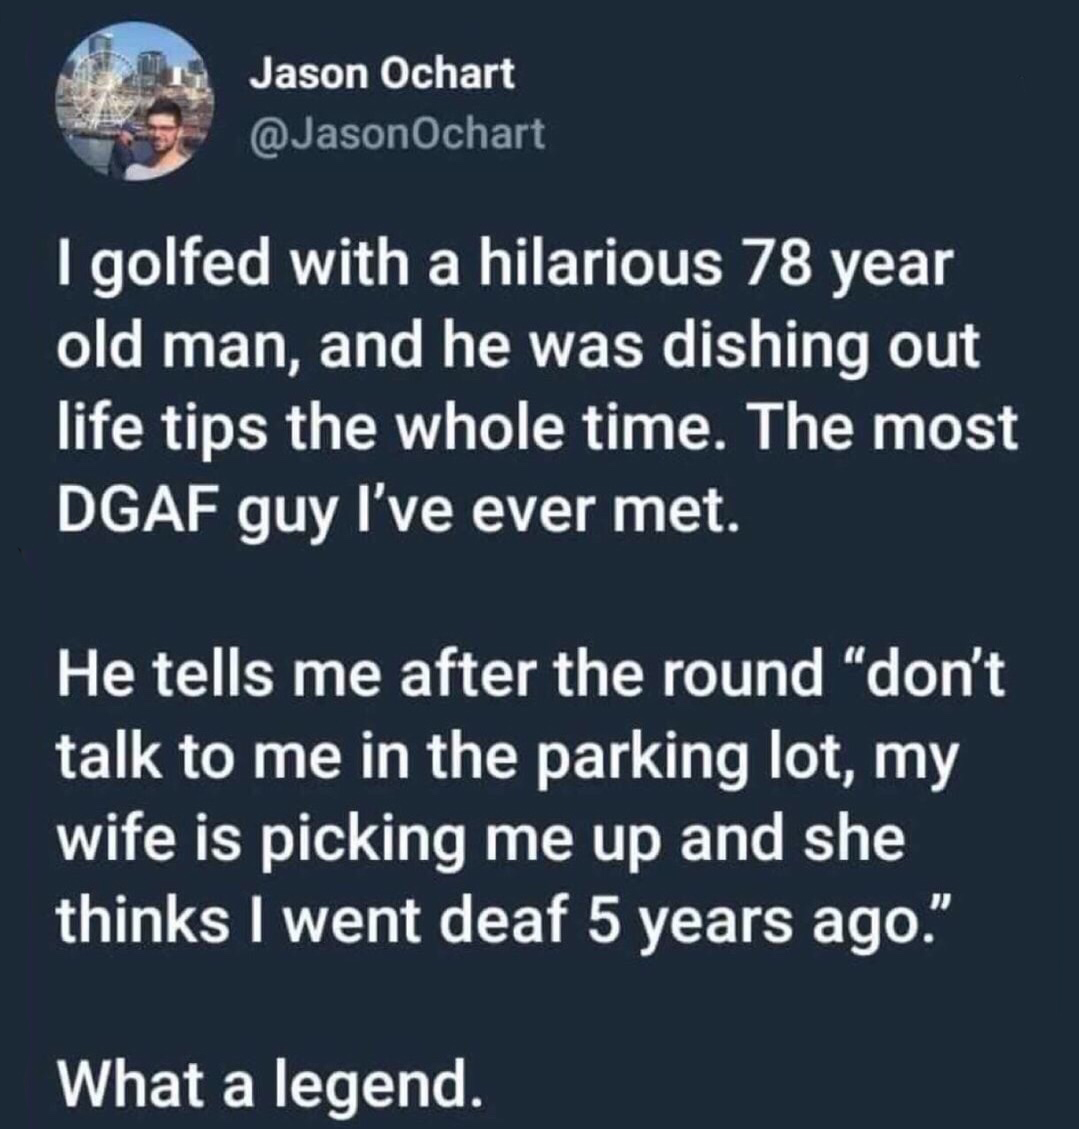 material - Jason Ochart I golfed with a hilarious 78 year old man, and he was dishing out life tips the whole time. The most Dgaf guy I've ever met. He tells me after the round don't talk to me in the parking lot, my wife is picking me up and she thinks I